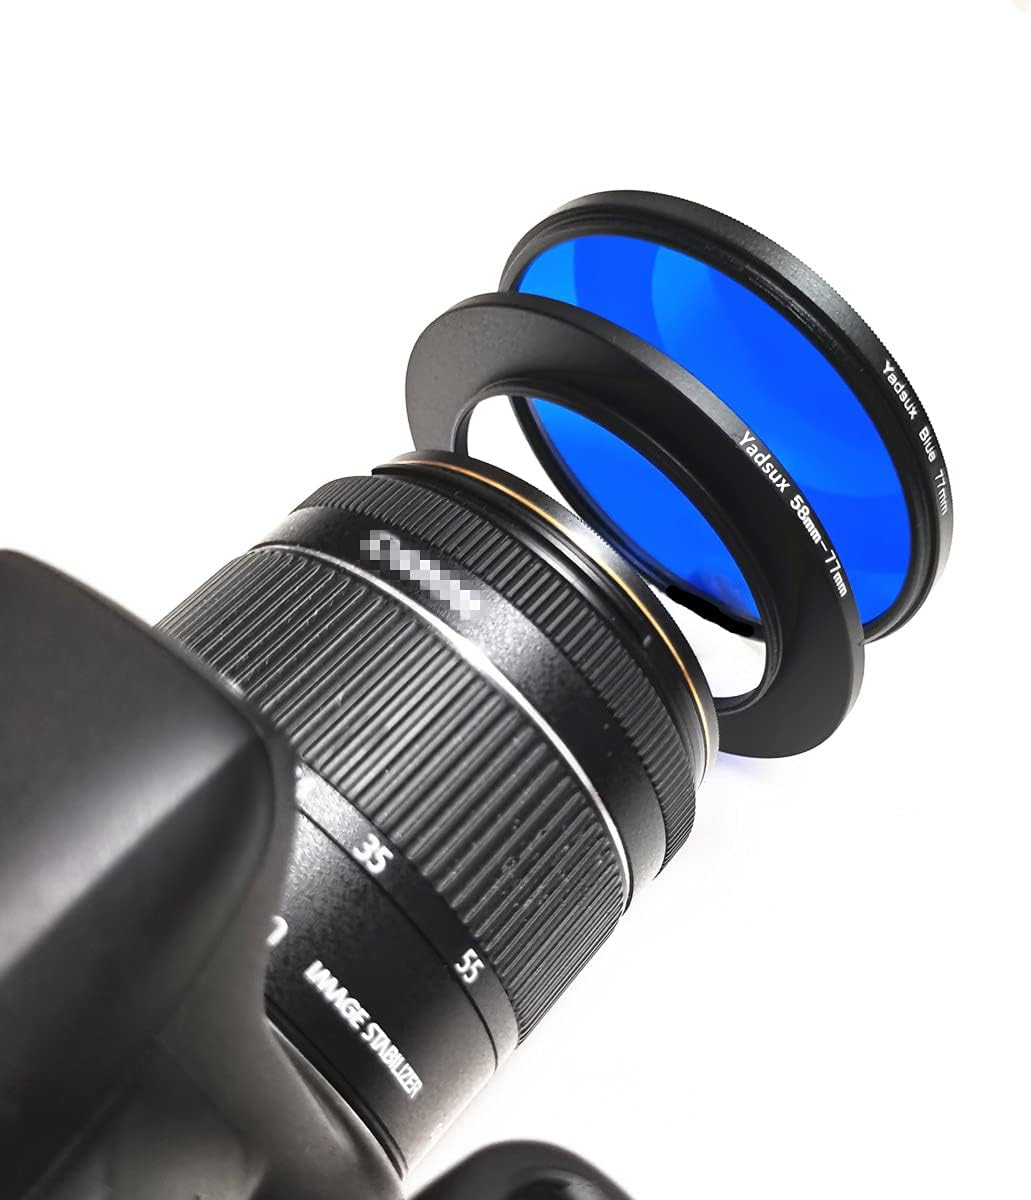 55mm to 82mm Step Up Ring, for Camera Lenses and Filter,Metal Filters Step-Up Ring Adapter,The Connection 55MM Lens to 82MM Filter Lens Accessory